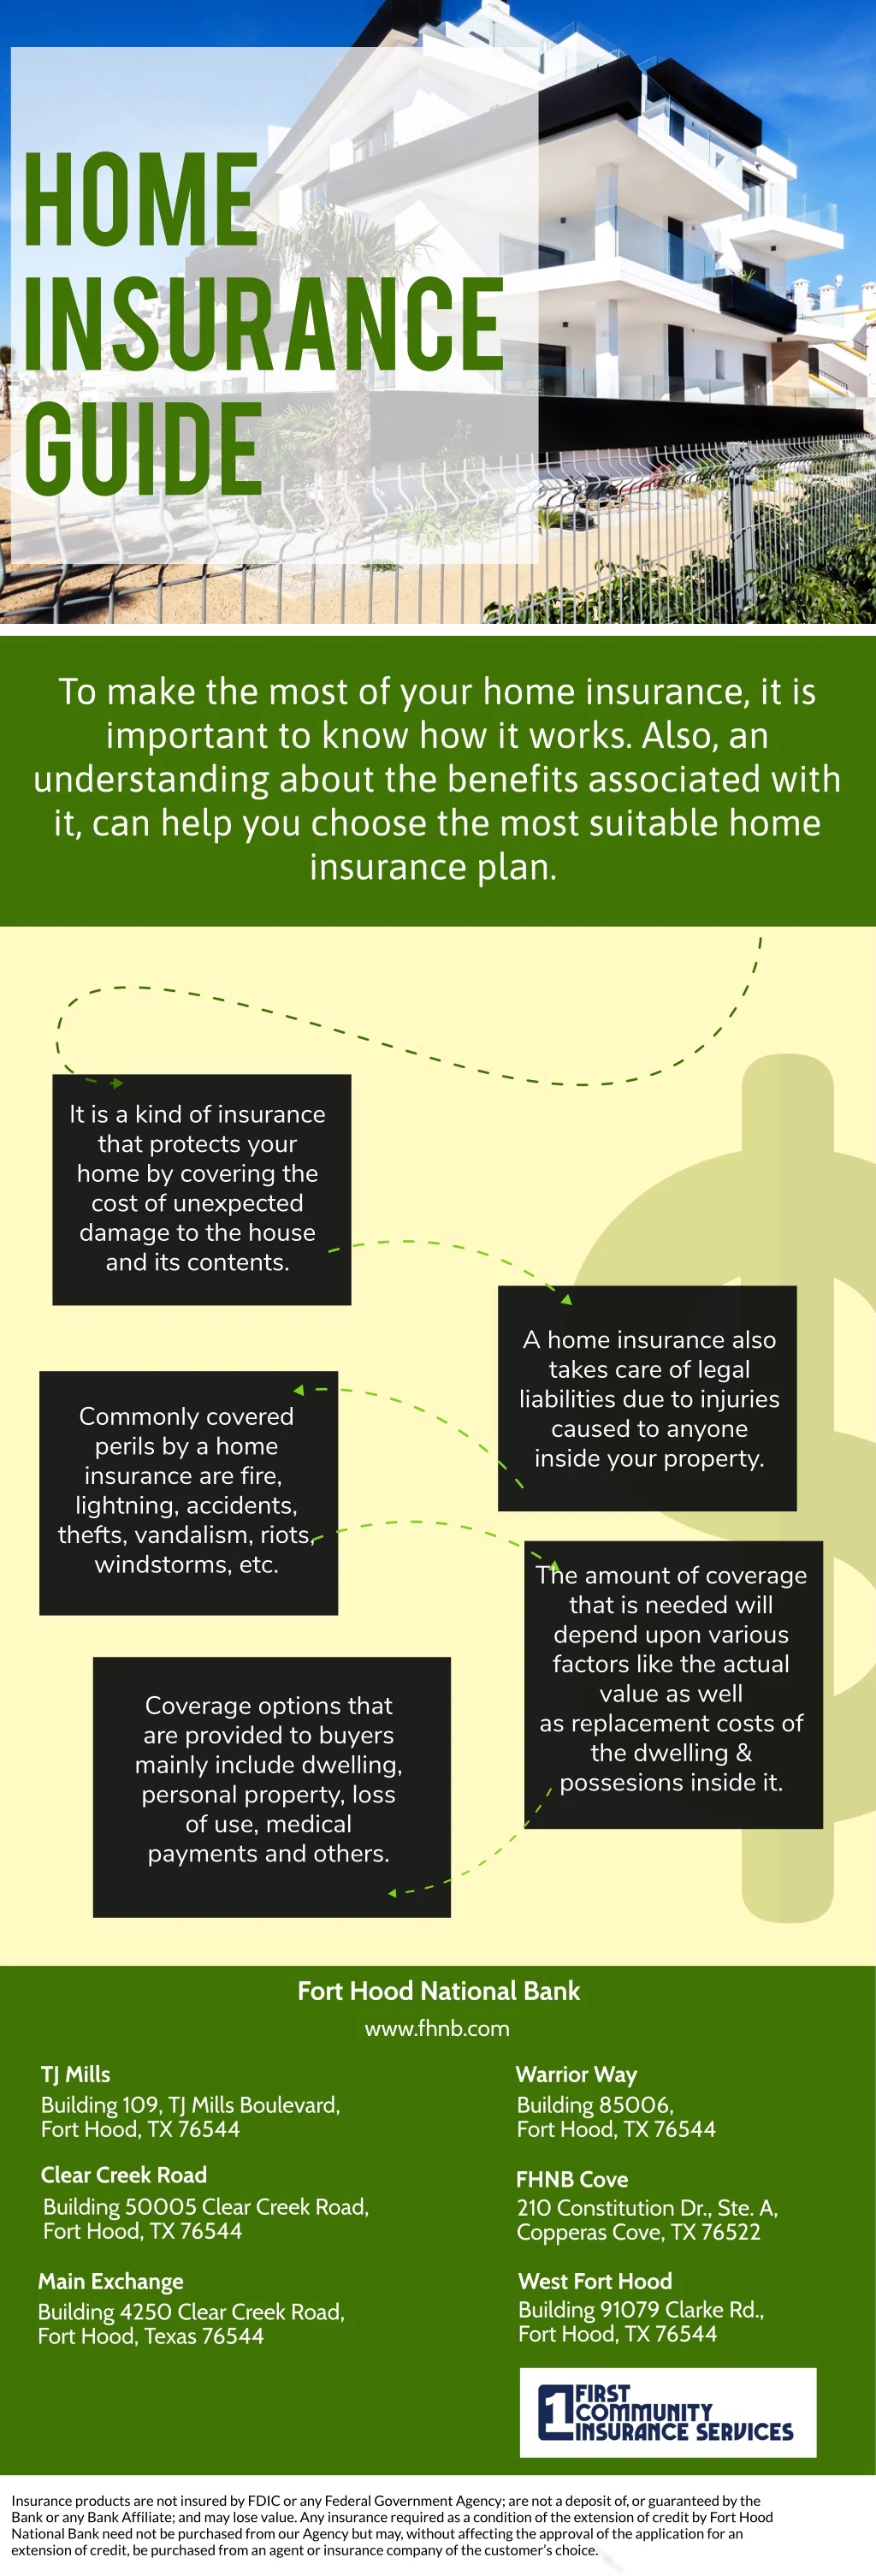 home insurance guide